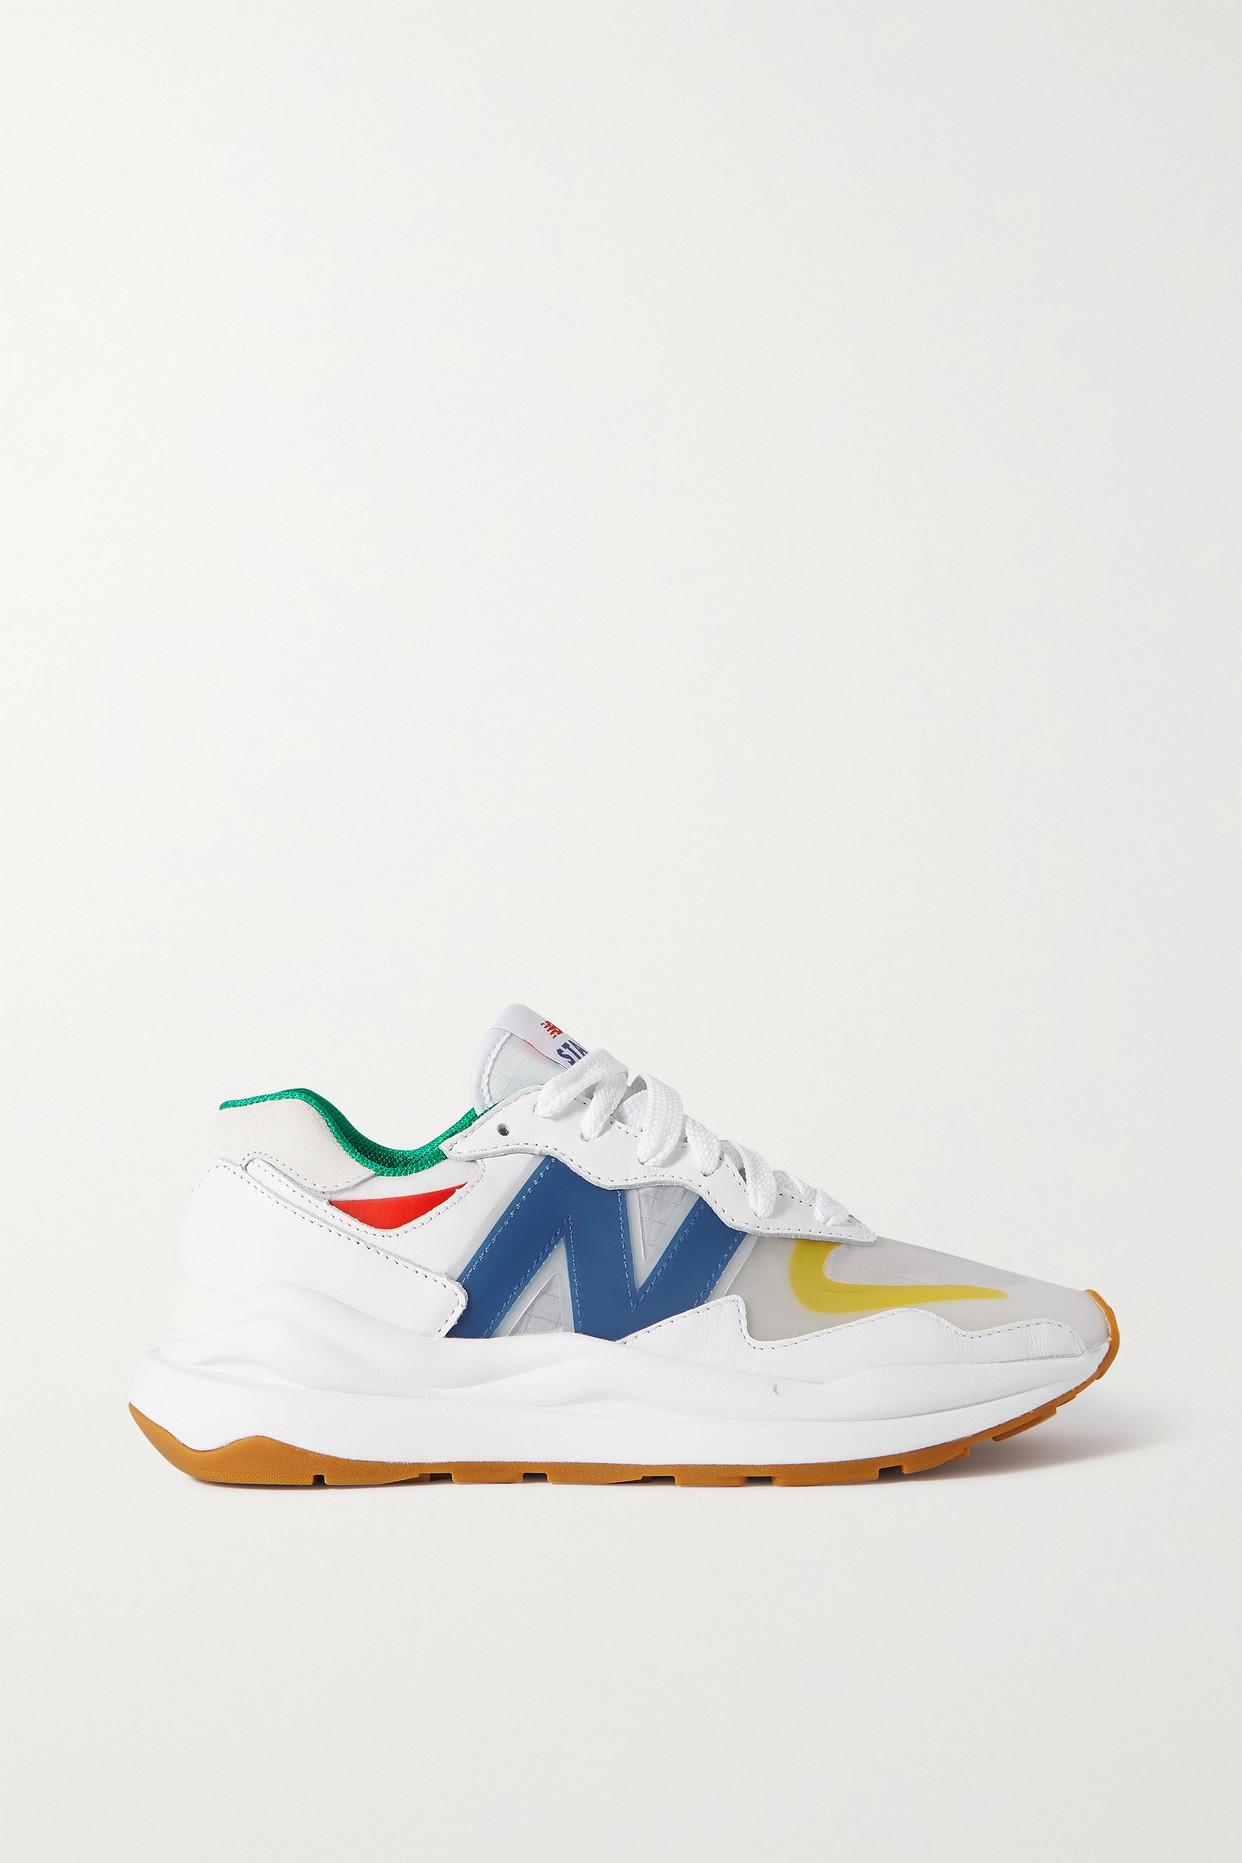 STAUD + New Balance 57/40 Leather And Mesh Sneakers in White | Lyst